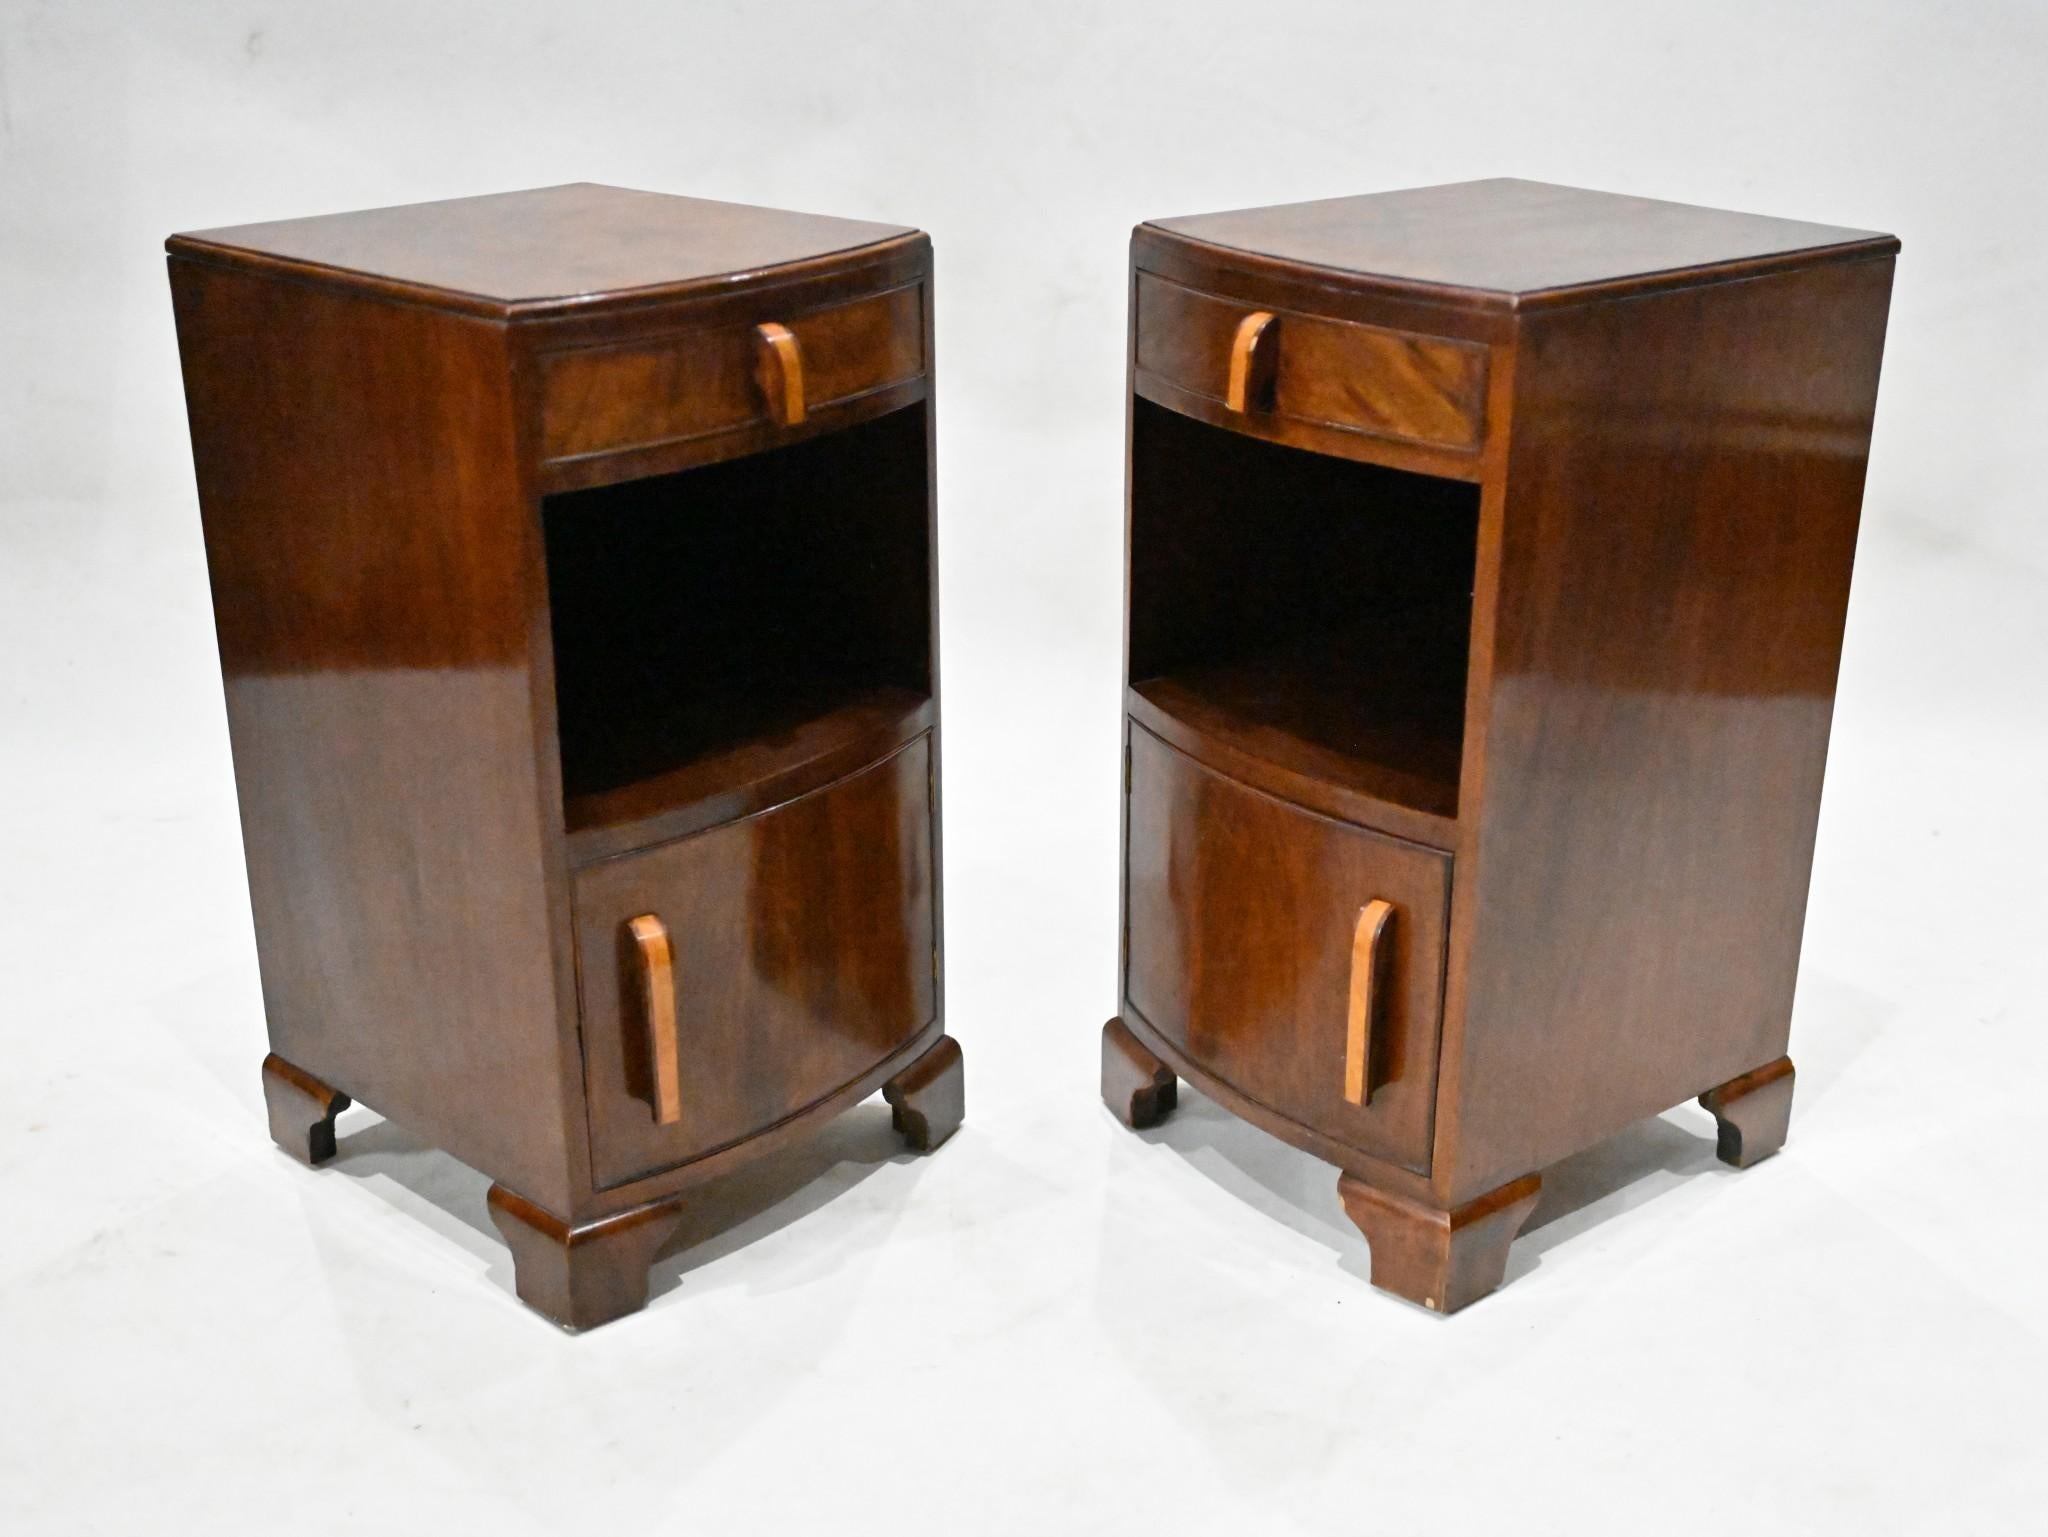 Gorgeous pair of art deco bedside cabinets
Period art deco - circa 1930
Clean and minimal design perfect for modern interiors
Offered in great condition ready for home use right away
Will ship to anywhere in the world - please get in touch for a